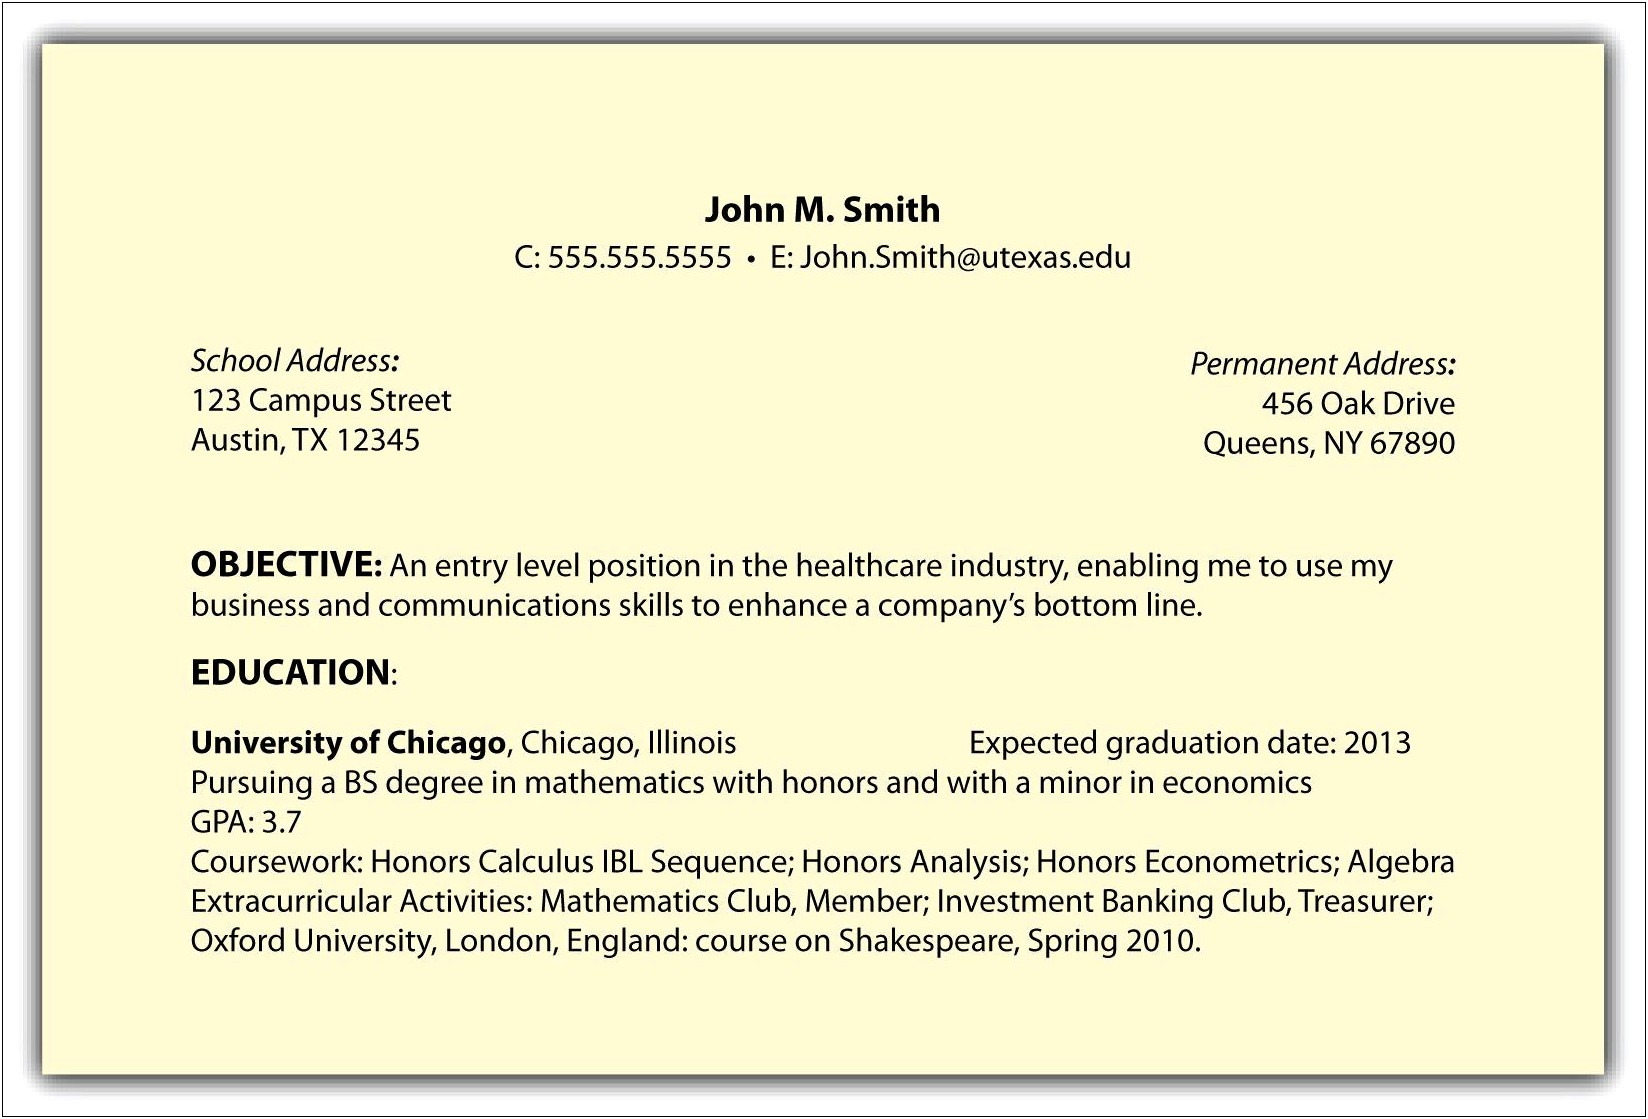 Resume Objective Sample For Healthcare